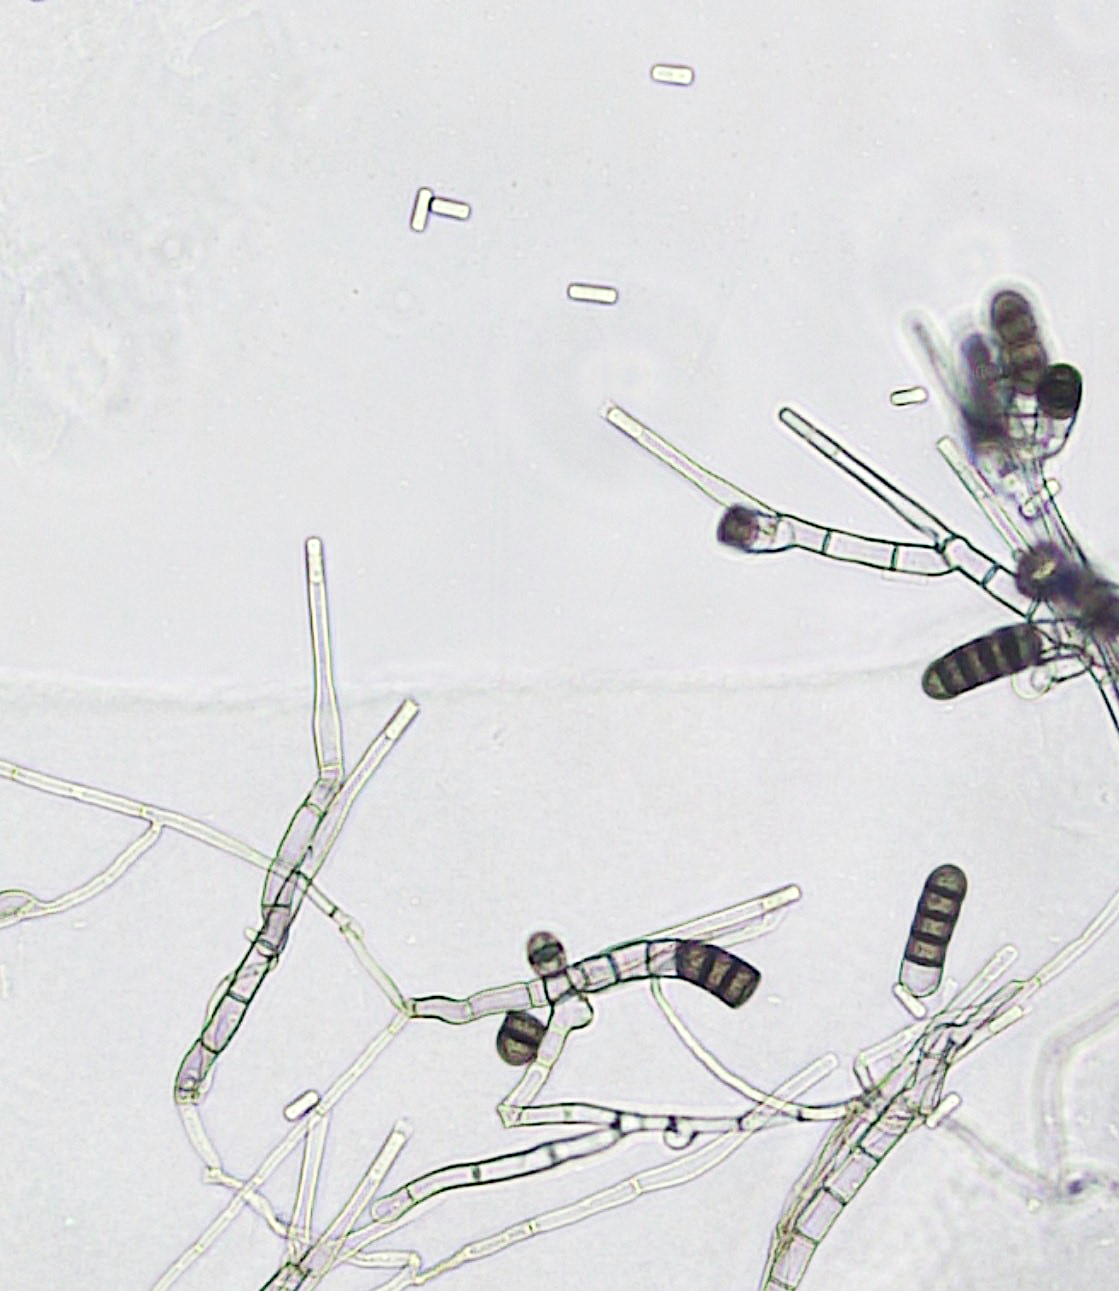 Microscopic view of B. basicola showing rectangular endospores and larger brown resting spores.